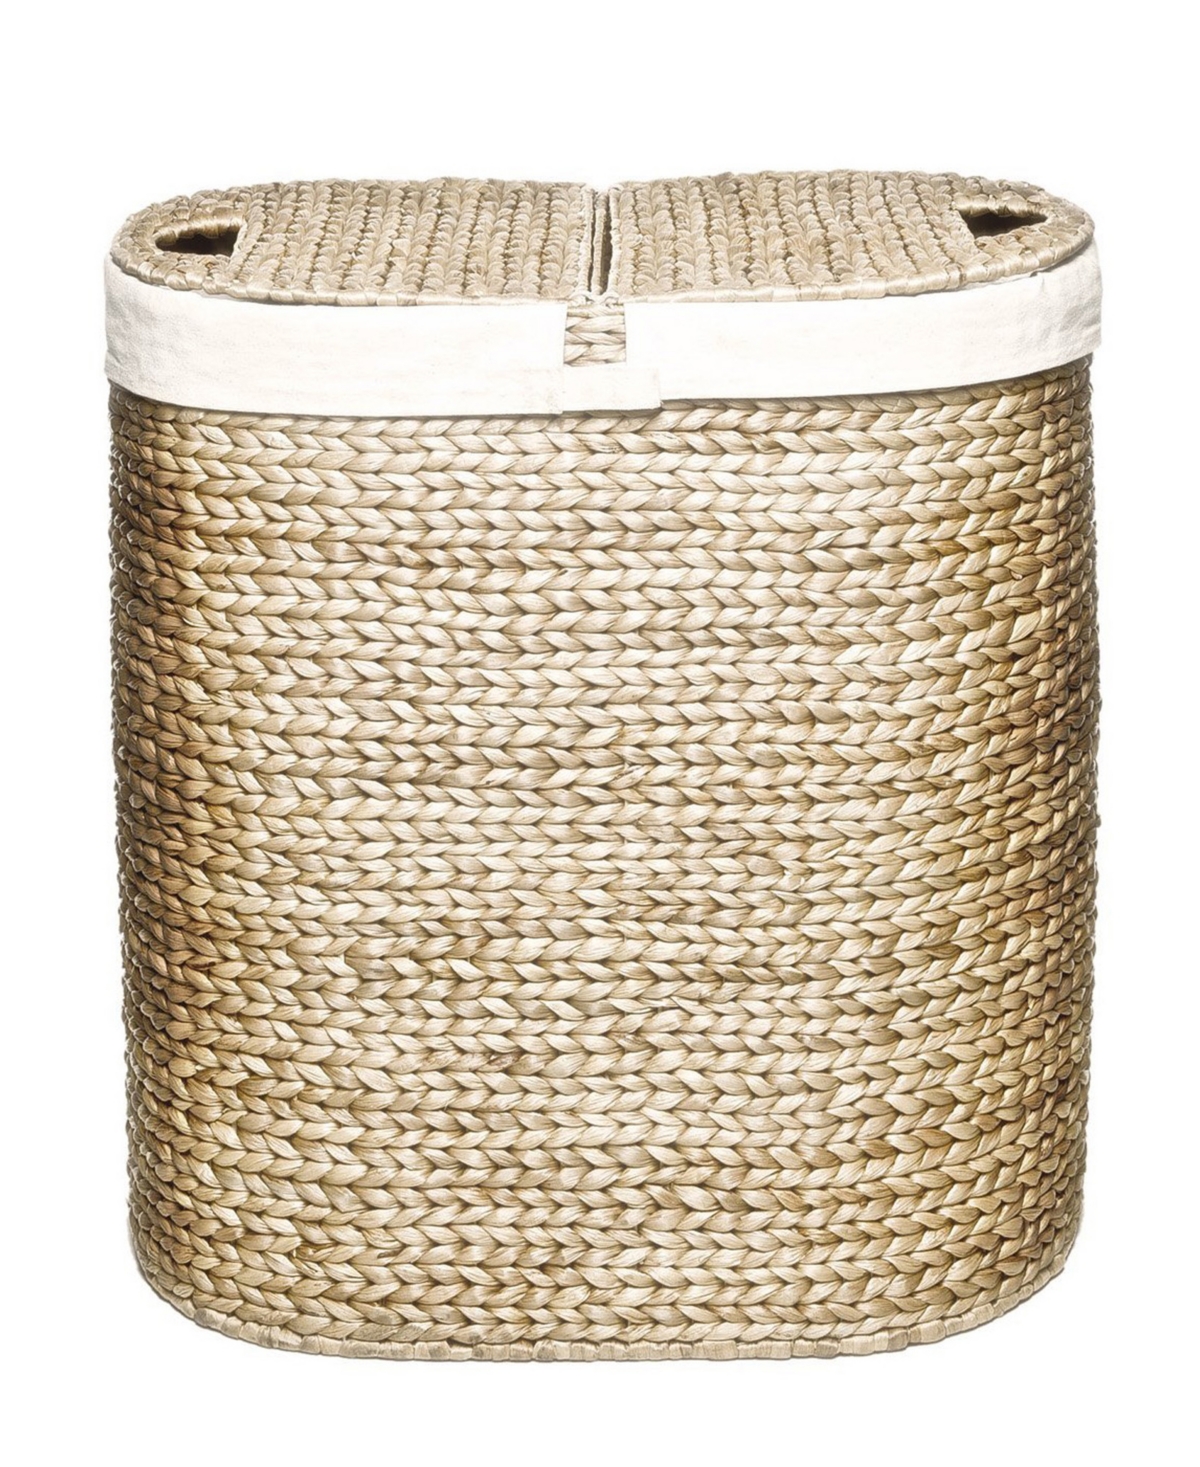 UPC 017641001679 product image for Seville Classics Water Hyacinth Lidded Oval Double Hamper | upcitemdb.com